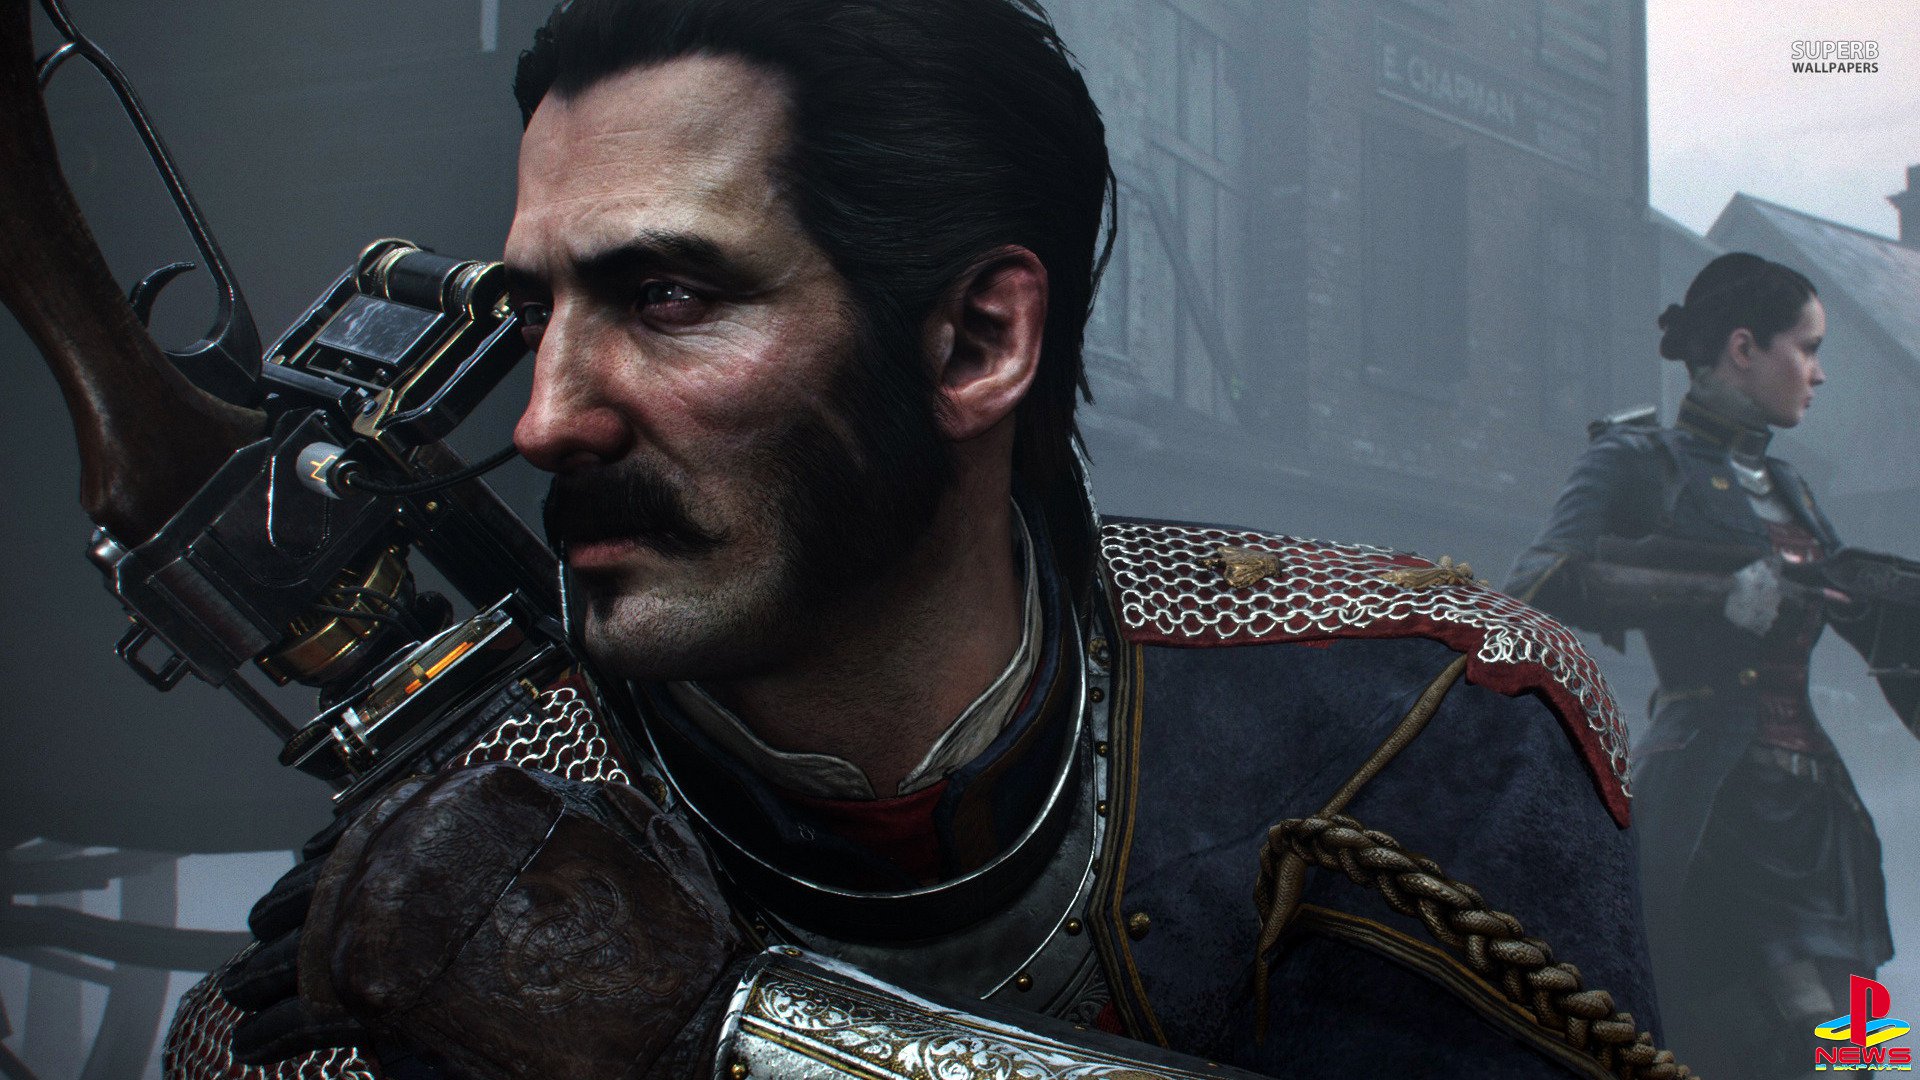       The Order: 1886